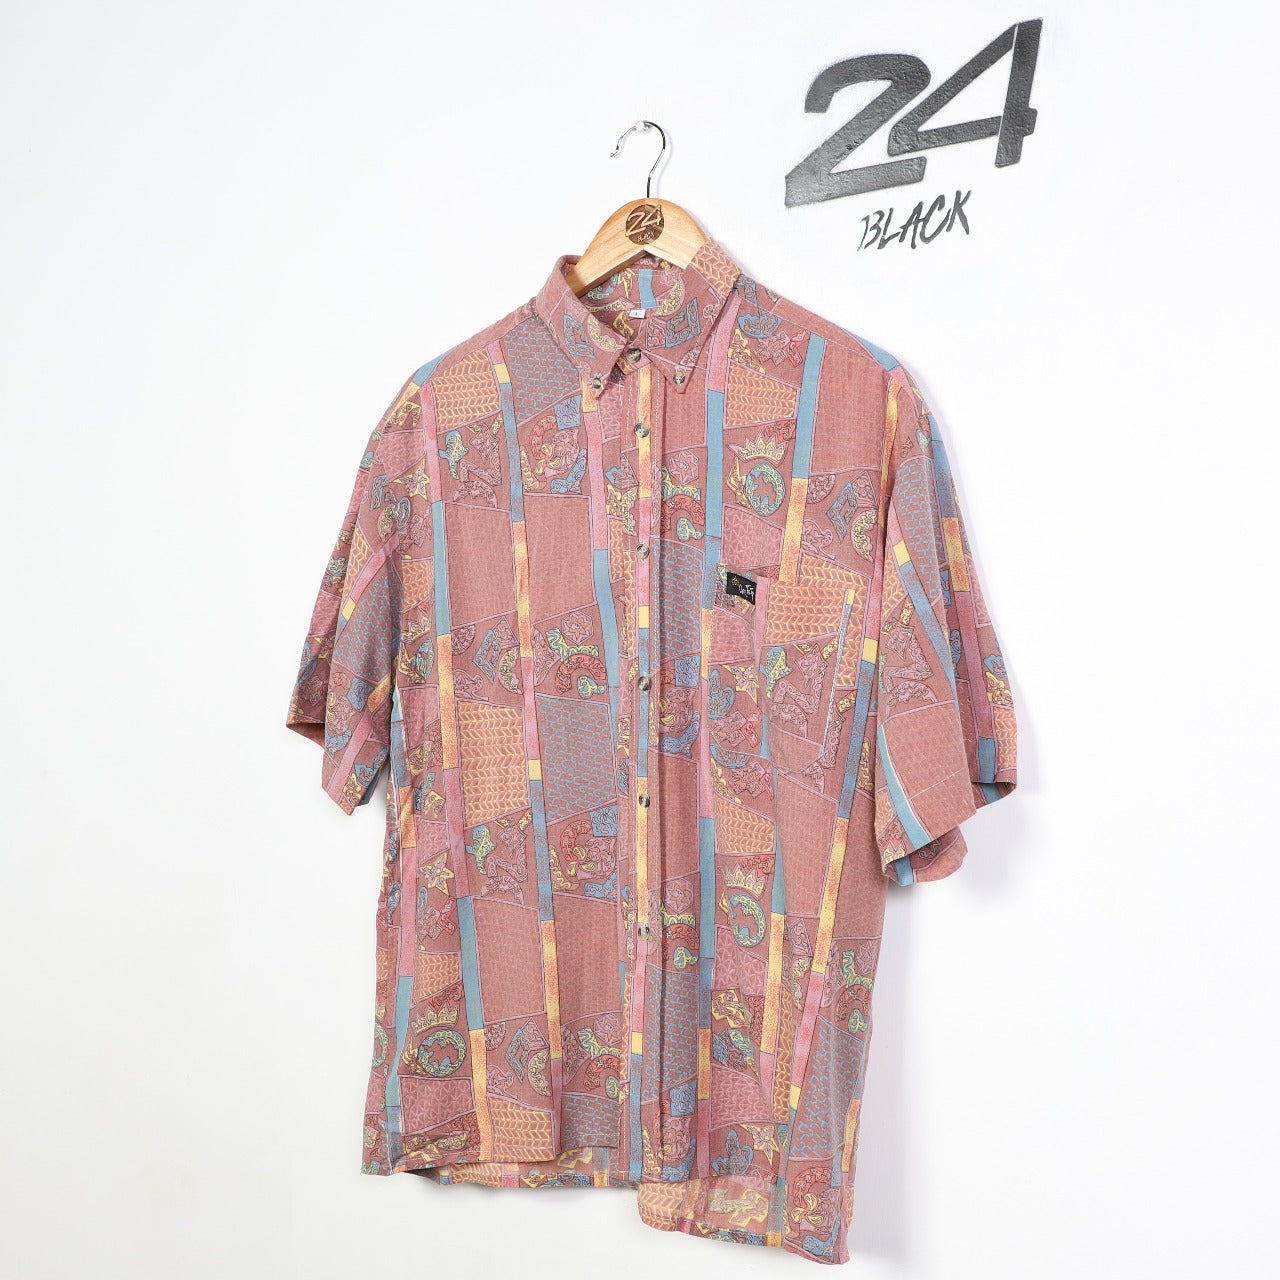 Vintage 90's Abstract Shirt